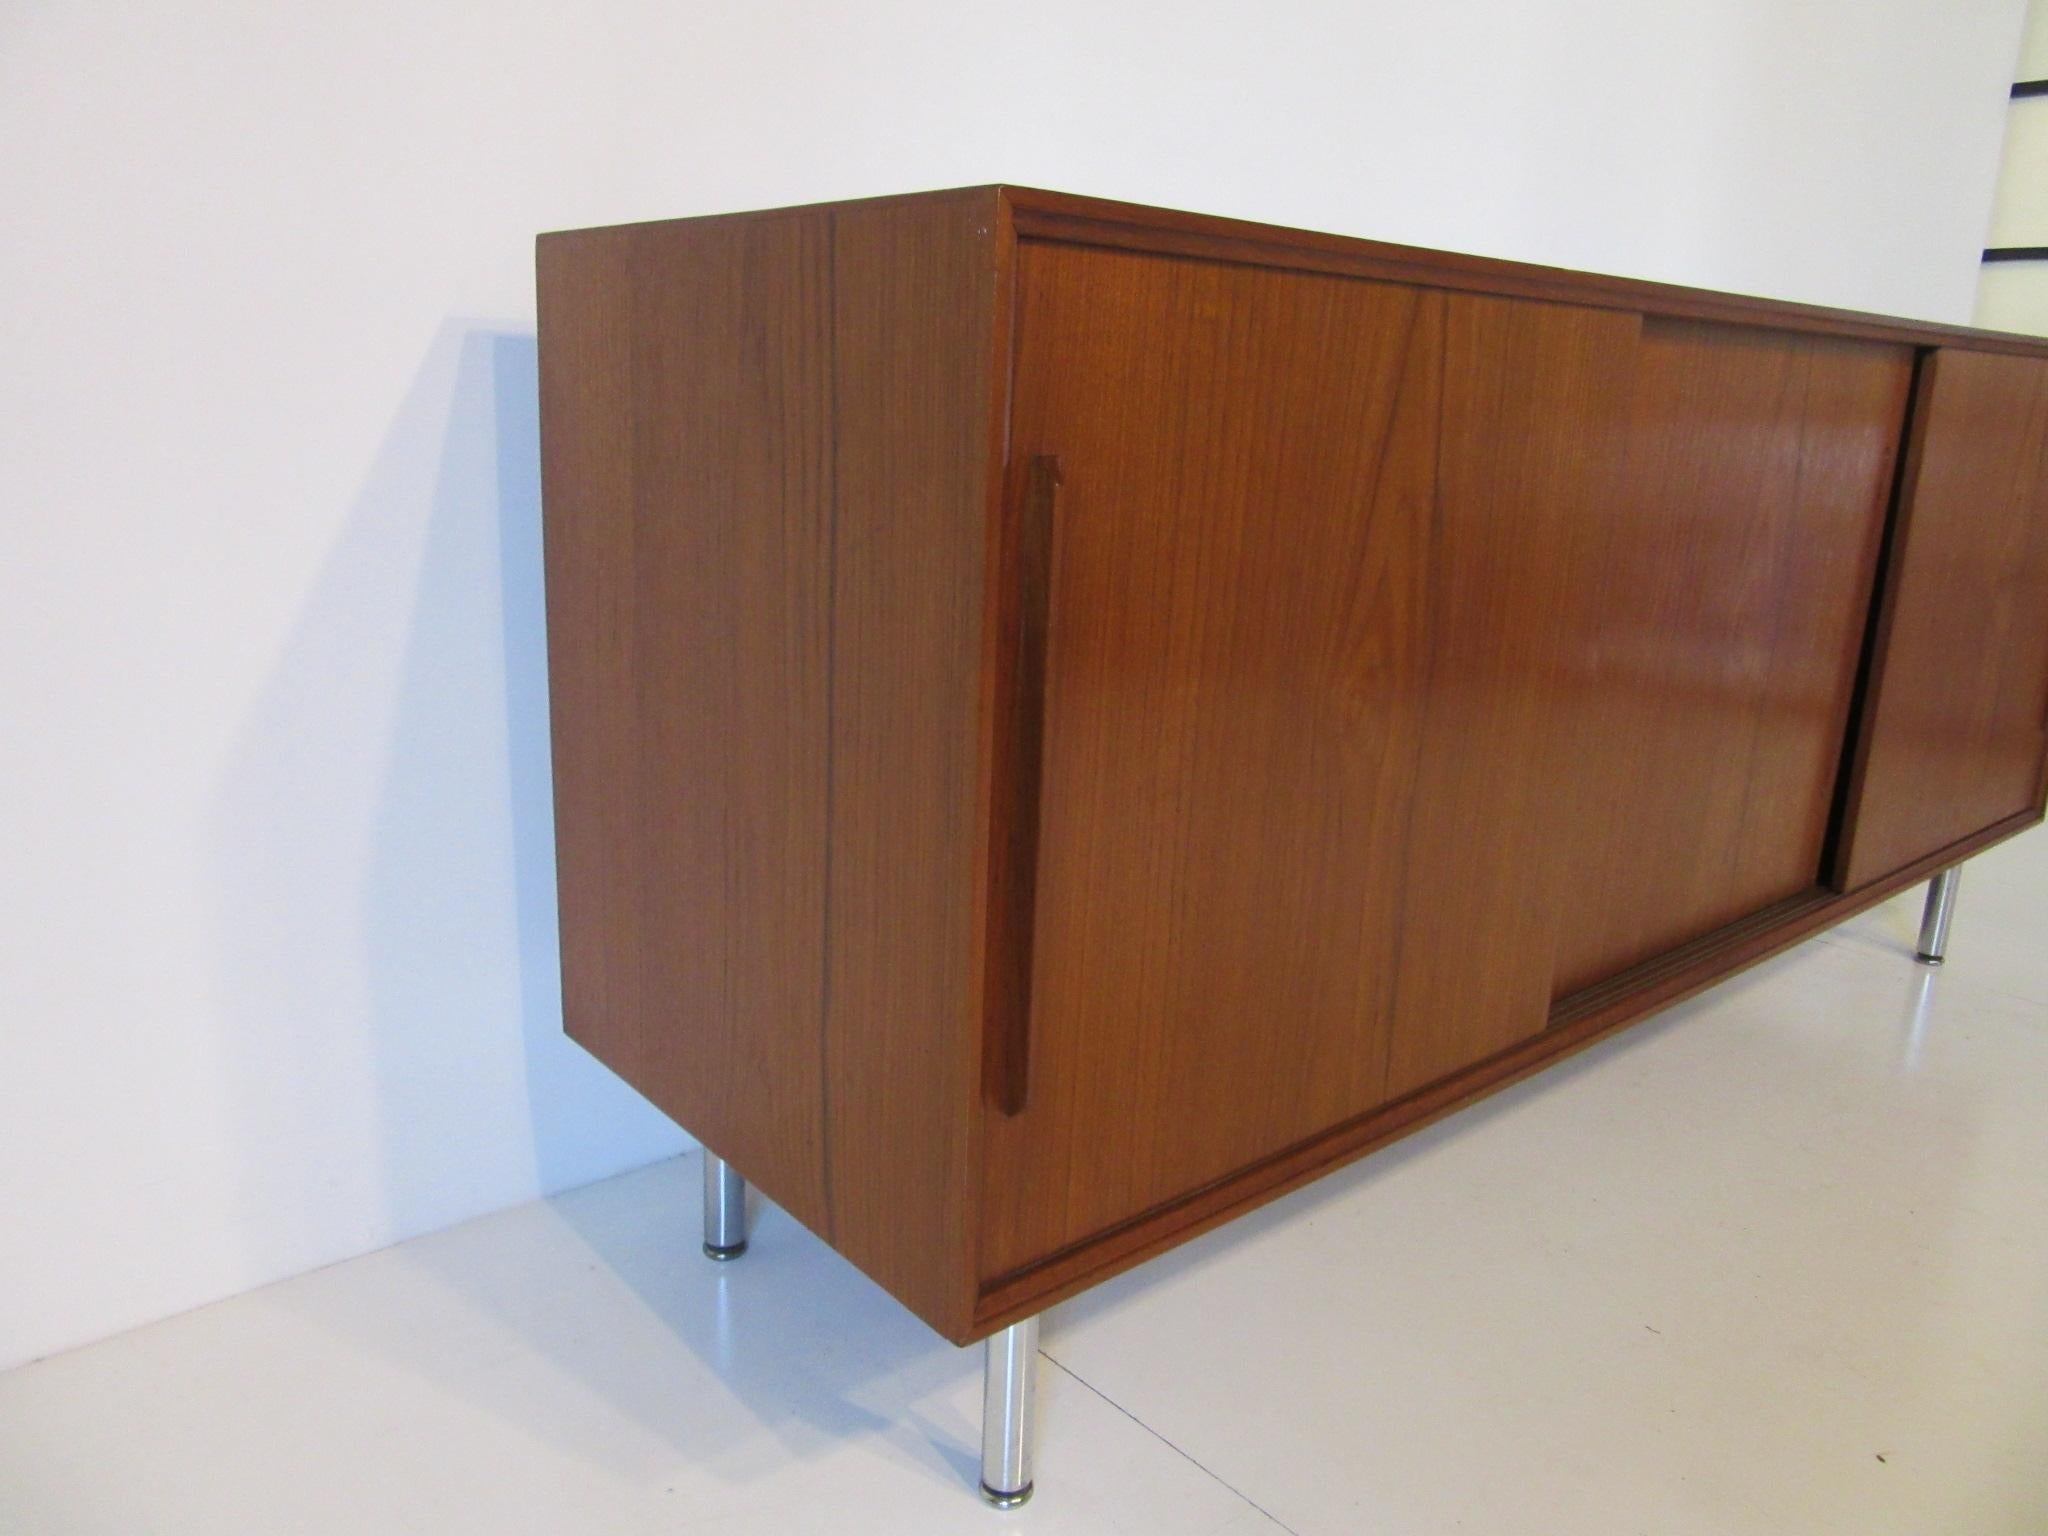 A three sliding door teak wood credenza or server with adjustable shelves, two small drawers to one side and plenty of storage sitting on rounded chrome legs. Made in Denmark by Skovby Mobelfabrik AS.